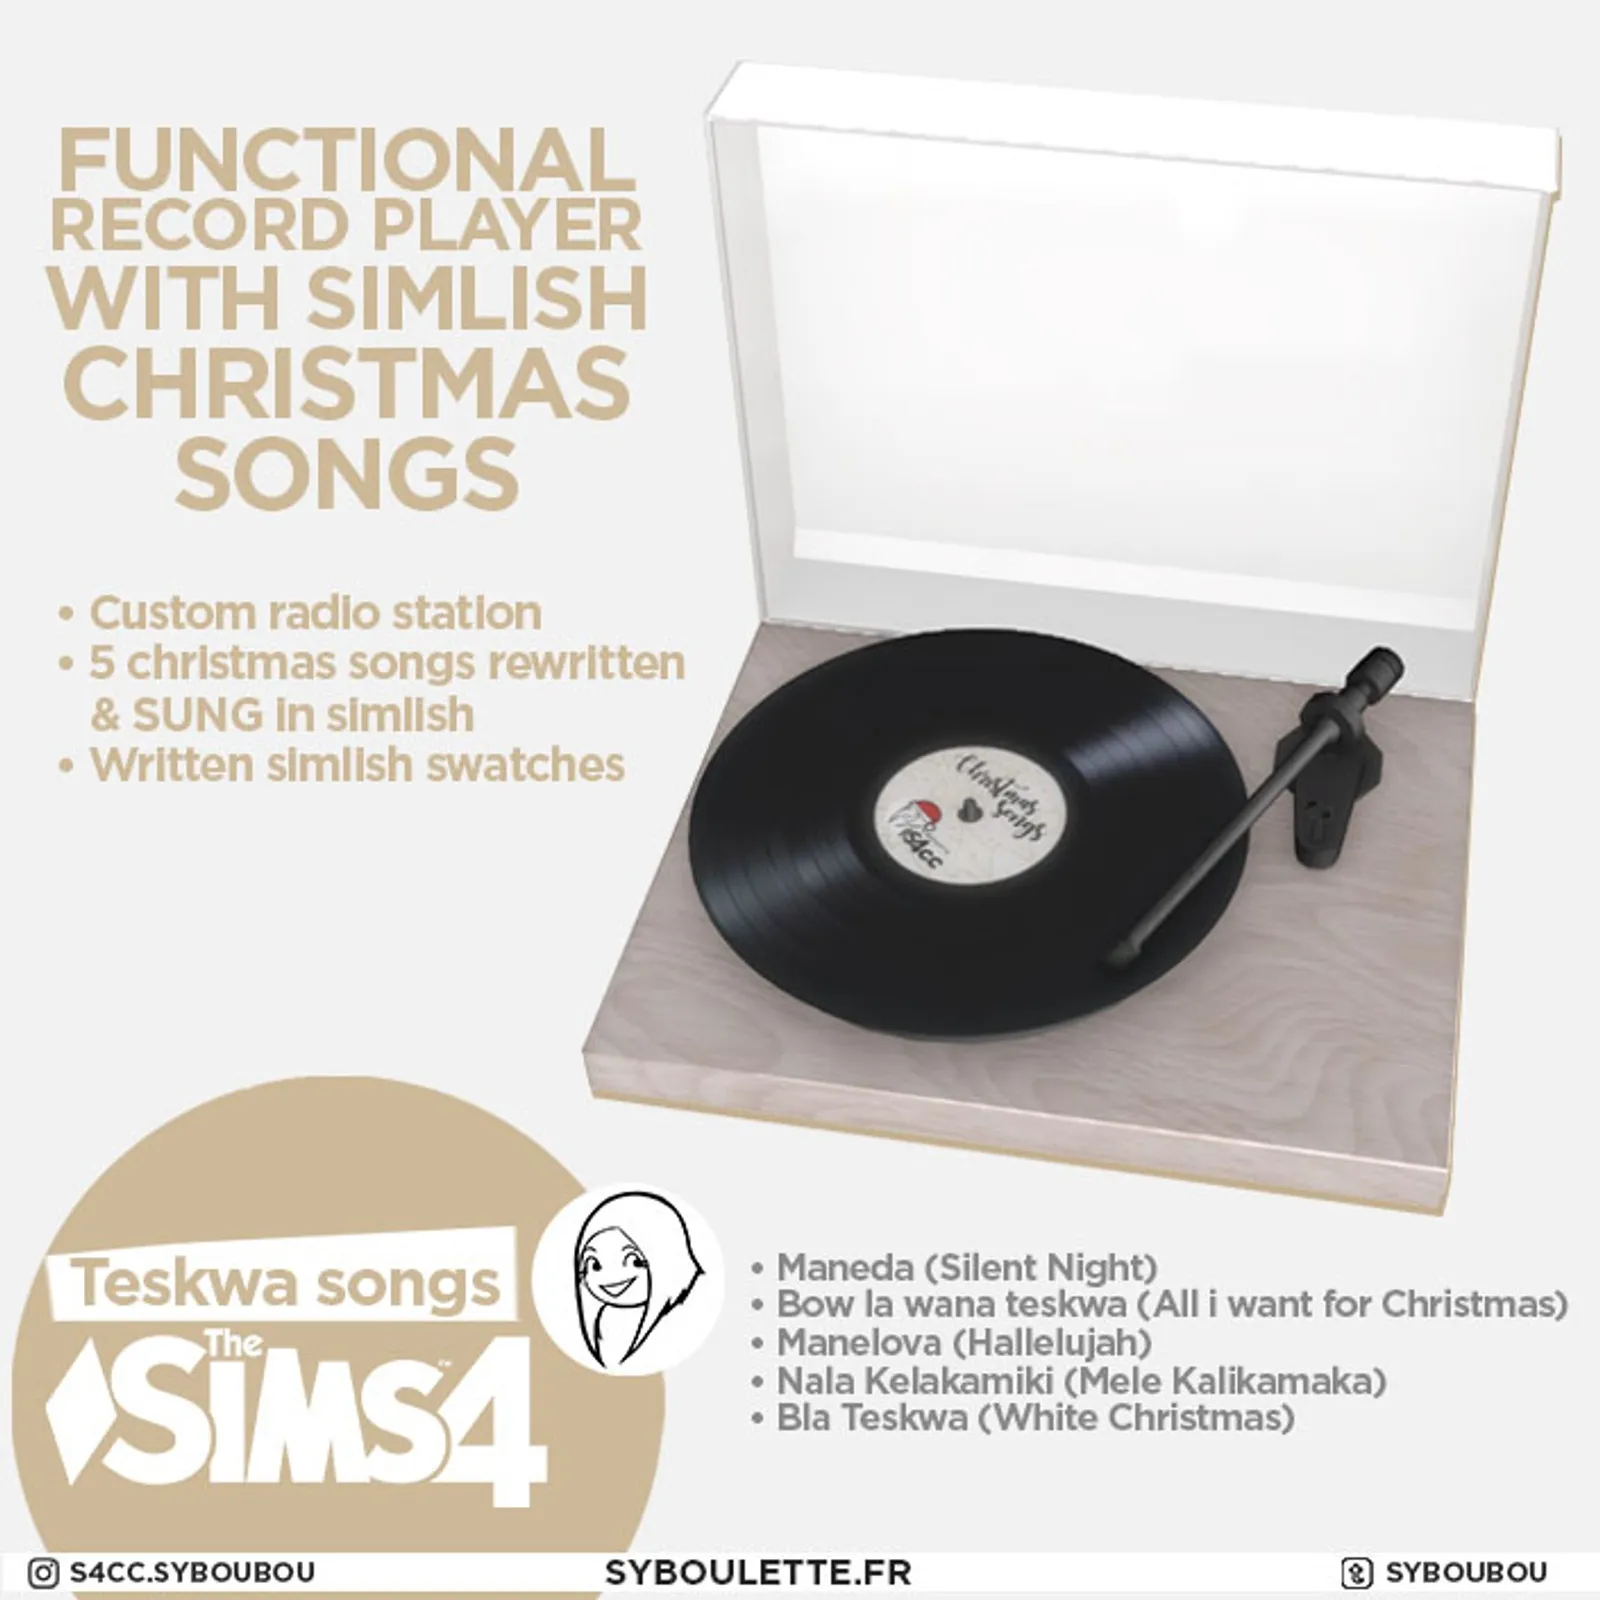 [DOWNLOAD] Teskwa songs: Record player with simlish Xmas songs !